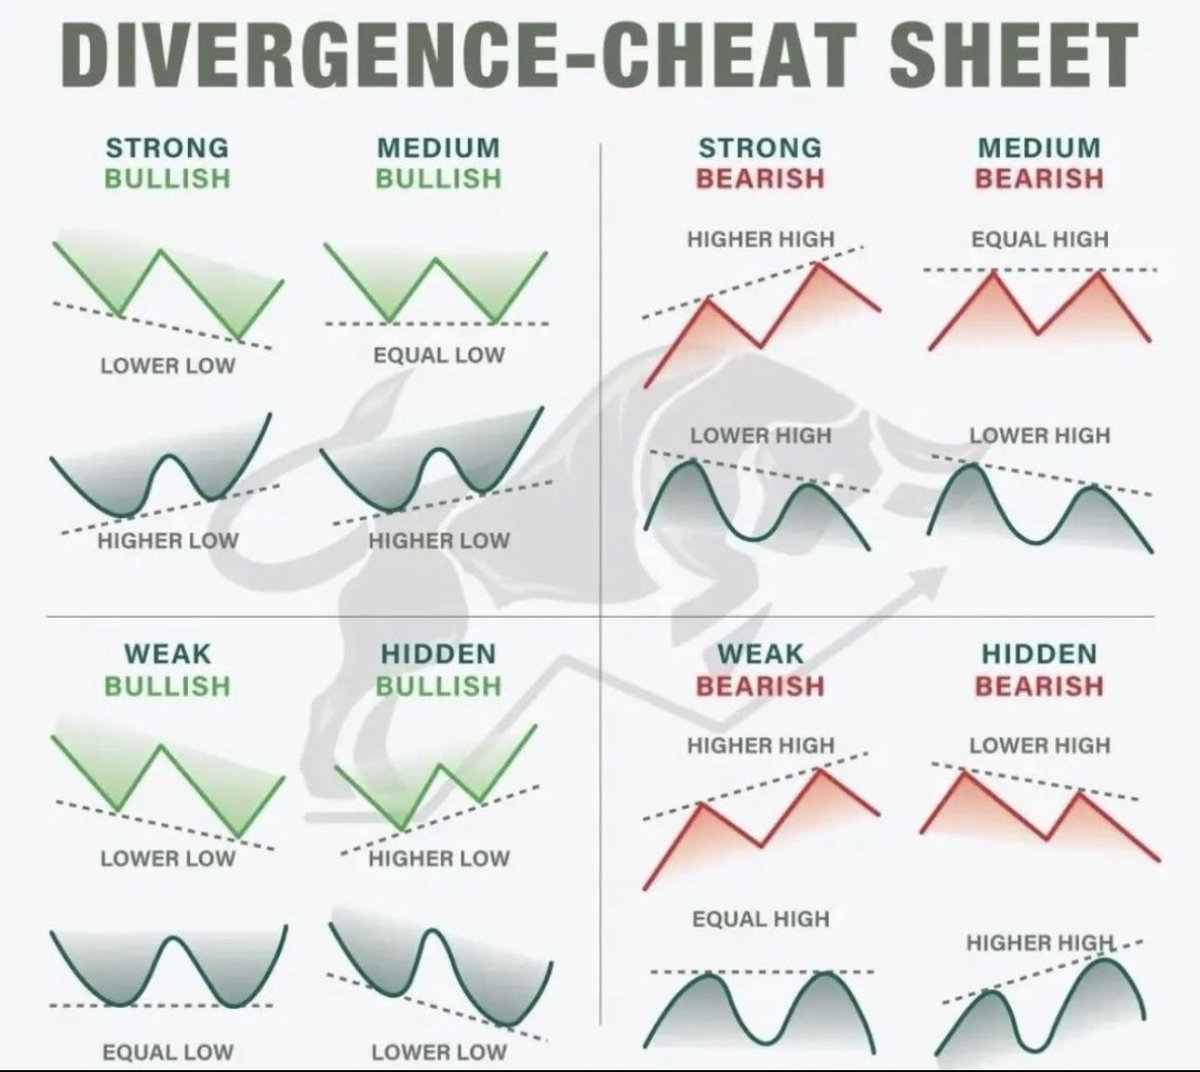 How to trade oscillator divergences and the different types 📚

Works on RSI, Stochastic,MACD histogram...

#trading #stockmarketeducation #tradingeducation #stockstrading